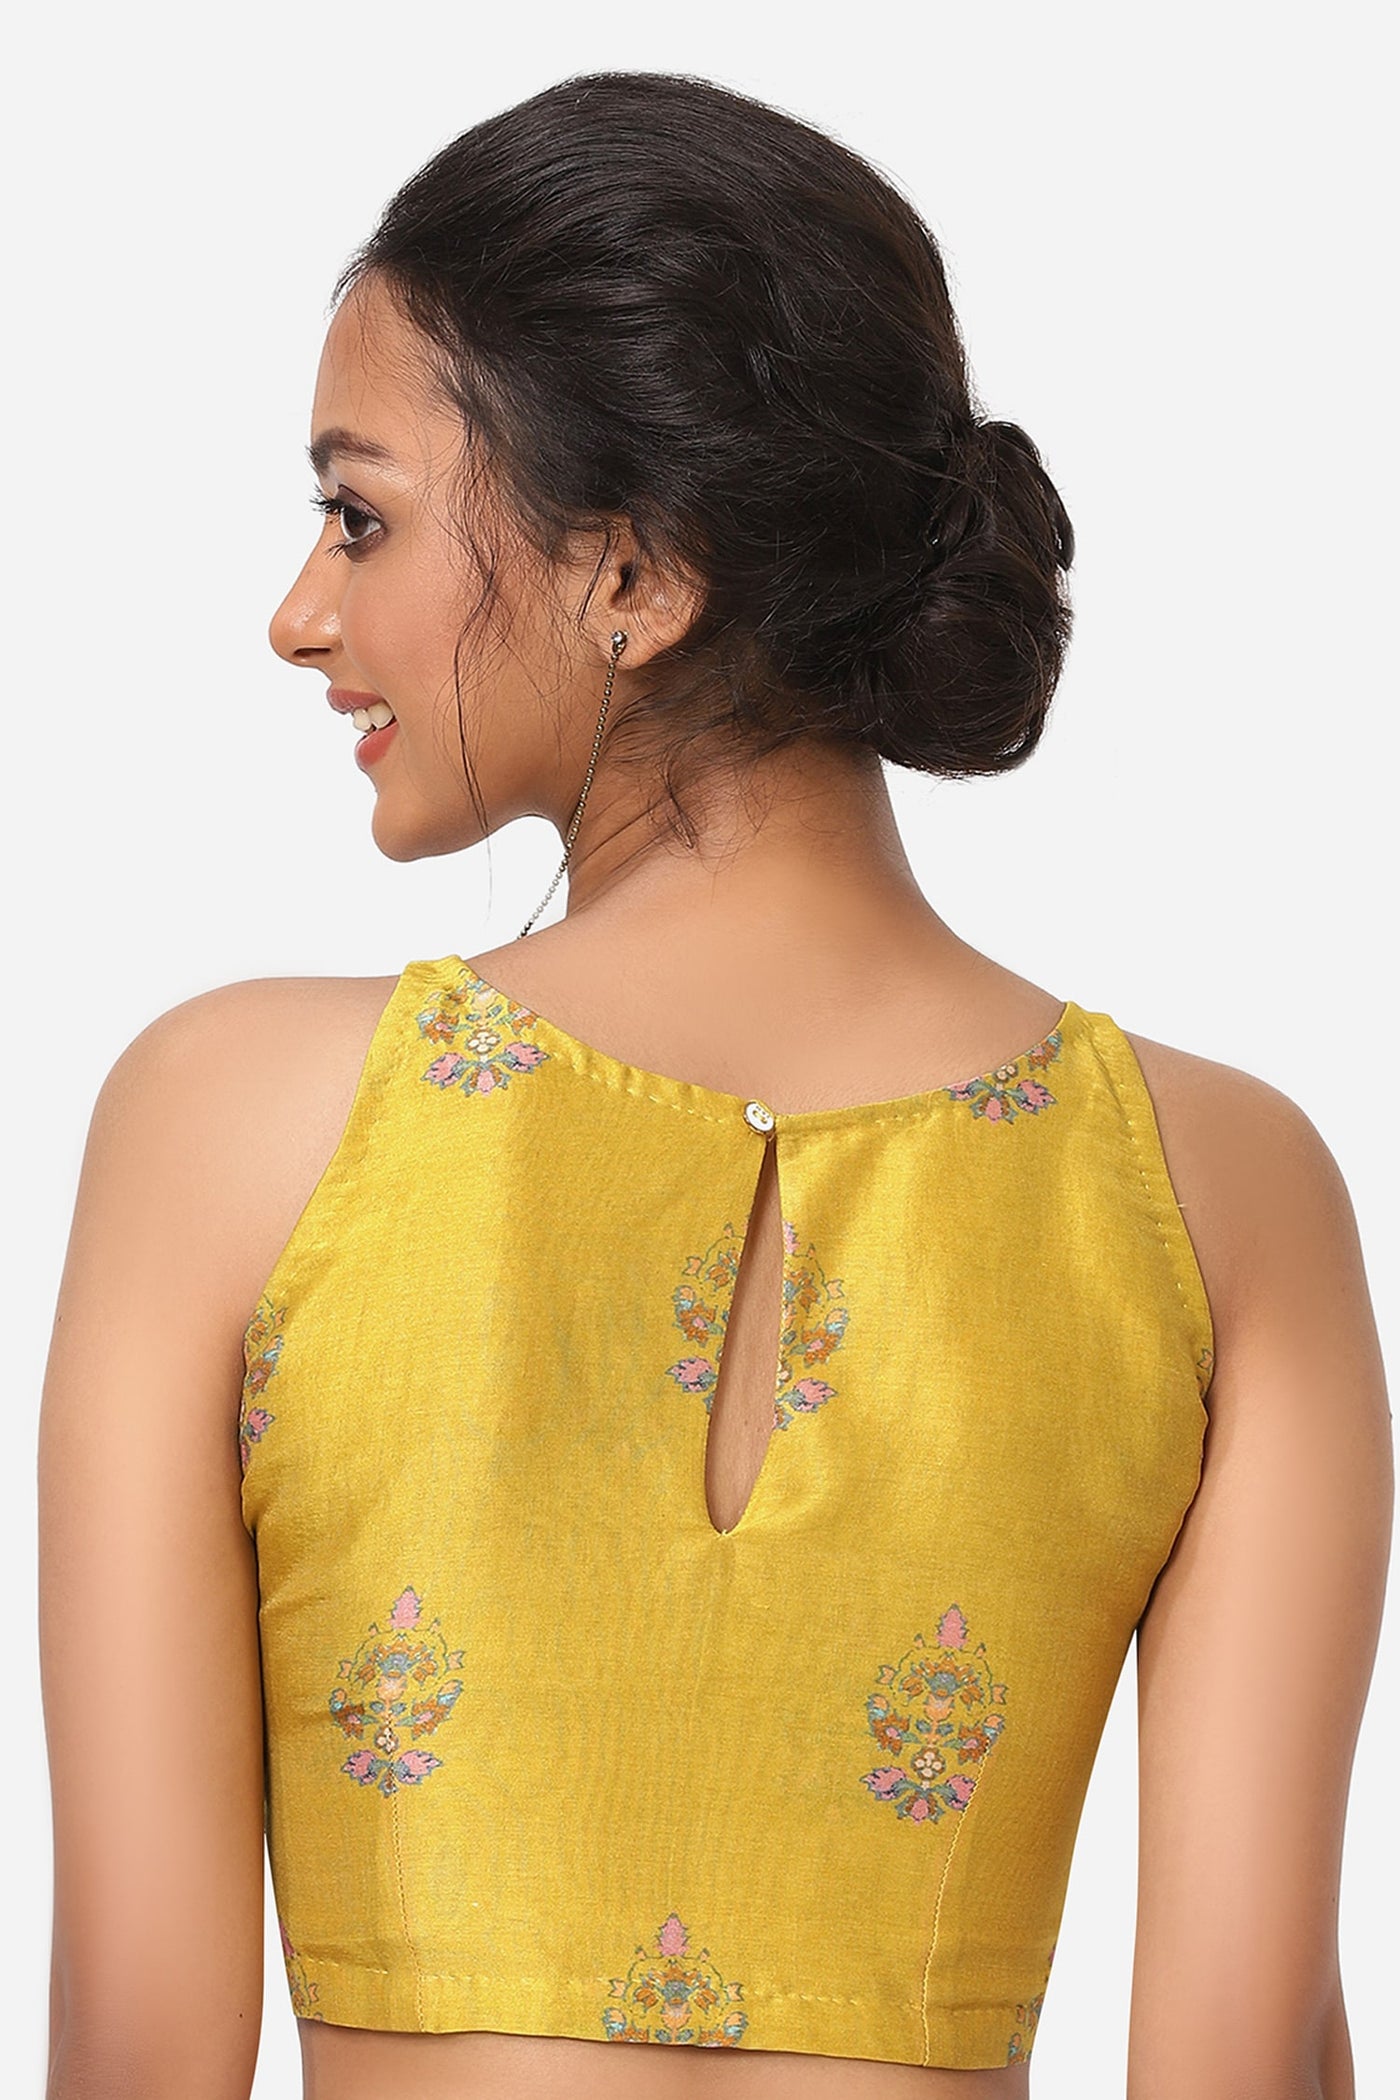 Yellow Silk Saree Blouse - Indian Clothing in Denver, CO, Aurora, CO, Boulder, CO, Fort Collins, CO, Colorado Springs, CO, Parker, CO, Highlands Ranch, CO, Cherry Creek, CO, Centennial, CO, and Longmont, CO. Nationwide shipping USA - India Fashion X